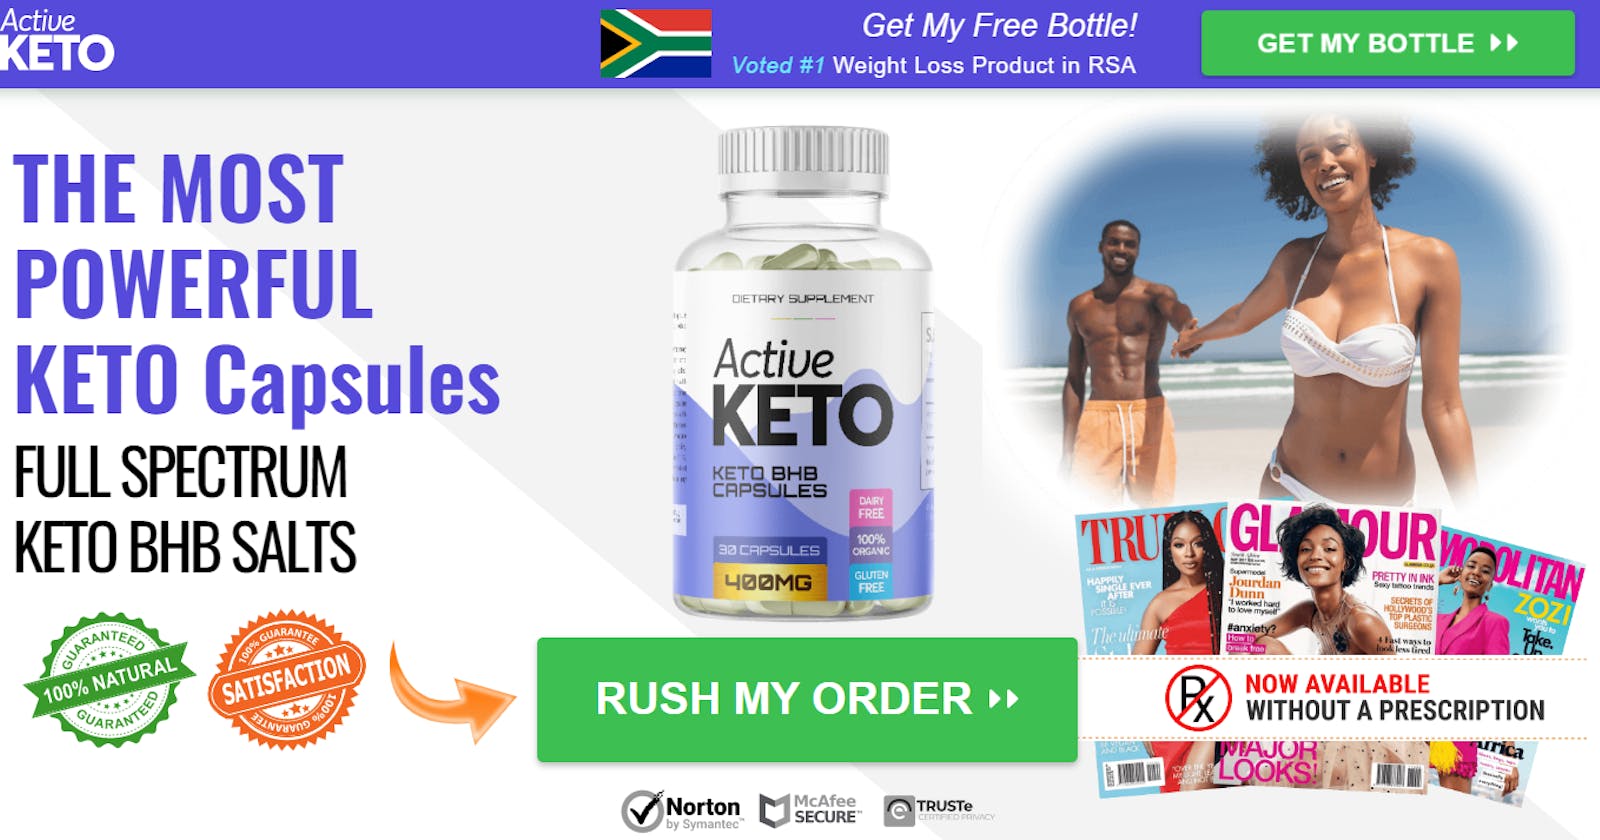 Active Keto Bhb Capsules- Alarming Customer Complaints! Cheap Scam Product?